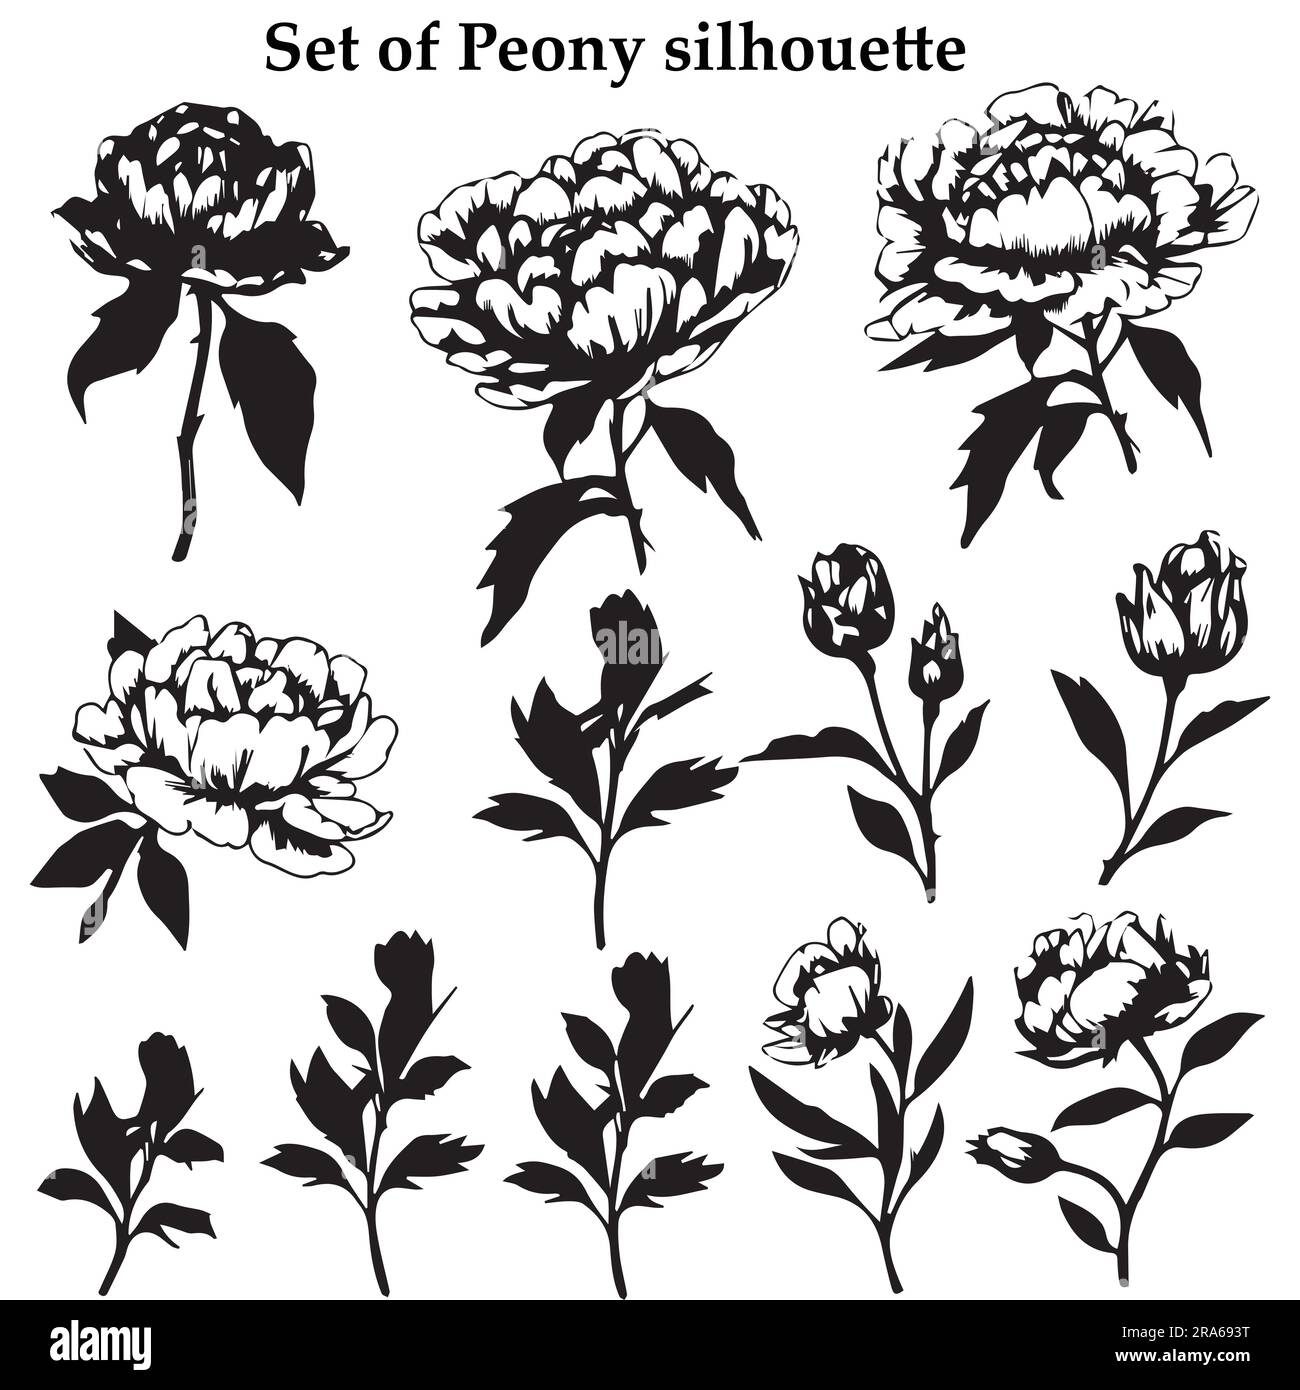 A set of peony silhouette vector illustration Stock Vector